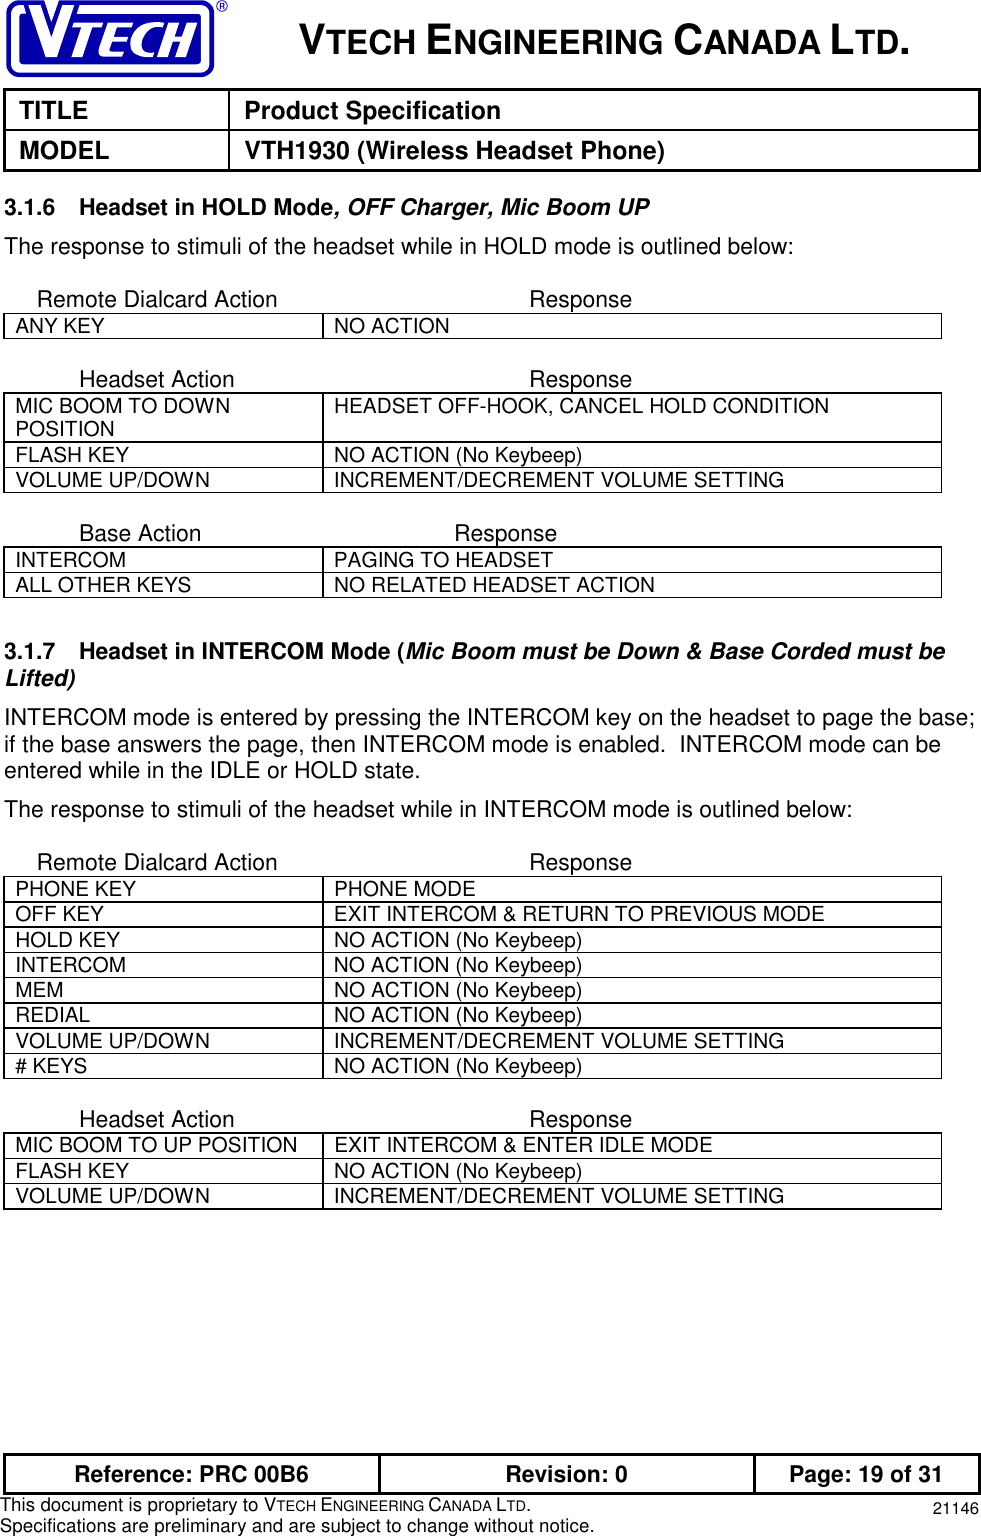 VTECH ENGINEERING CANADA LTD.TITLE Product SpecificationMODEL VTH1930 (Wireless Headset Phone)Reference: PRC 00B6 Revision: 0 Page: 19 of 31This document is proprietary to VTECH ENGINEERING CANADA LTD.Specifications are preliminary and are subject to change without notice. 211463.1.6 Headset in HOLD Mode, OFF Charger, Mic Boom UPThe response to stimuli of the headset while in HOLD mode is outlined below:     Remote Dialcard Action ResponseANY KEY NO ACTIONHeadset Action ResponseMIC BOOM TO DOWNPOSITION HEADSET OFF-HOOK, CANCEL HOLD CONDITIONFLASH KEY NO ACTION (No Keybeep)VOLUME UP/DOWN INCREMENT/DECREMENT VOLUME SETTINGBase Action ResponseINTERCOM PAGING TO HEADSETALL OTHER KEYS NO RELATED HEADSET ACTION3.1.7 Headset in INTERCOM Mode (Mic Boom must be Down &amp; Base Corded must beLifted)INTERCOM mode is entered by pressing the INTERCOM key on the headset to page the base;if the base answers the page, then INTERCOM mode is enabled.  INTERCOM mode can beentered while in the IDLE or HOLD state.The response to stimuli of the headset while in INTERCOM mode is outlined below:     Remote Dialcard Action ResponsePHONE KEY PHONE MODEOFF KEY EXIT INTERCOM &amp; RETURN TO PREVIOUS MODEHOLD KEY NO ACTION (No Keybeep)INTERCOM NO ACTION (No Keybeep)MEM NO ACTION (No Keybeep)REDIAL NO ACTION (No Keybeep)VOLUME UP/DOWN INCREMENT/DECREMENT VOLUME SETTING# KEYS NO ACTION (No Keybeep)Headset Action ResponseMIC BOOM TO UP POSITION EXIT INTERCOM &amp; ENTER IDLE MODEFLASH KEY NO ACTION (No Keybeep)VOLUME UP/DOWN INCREMENT/DECREMENT VOLUME SETTING